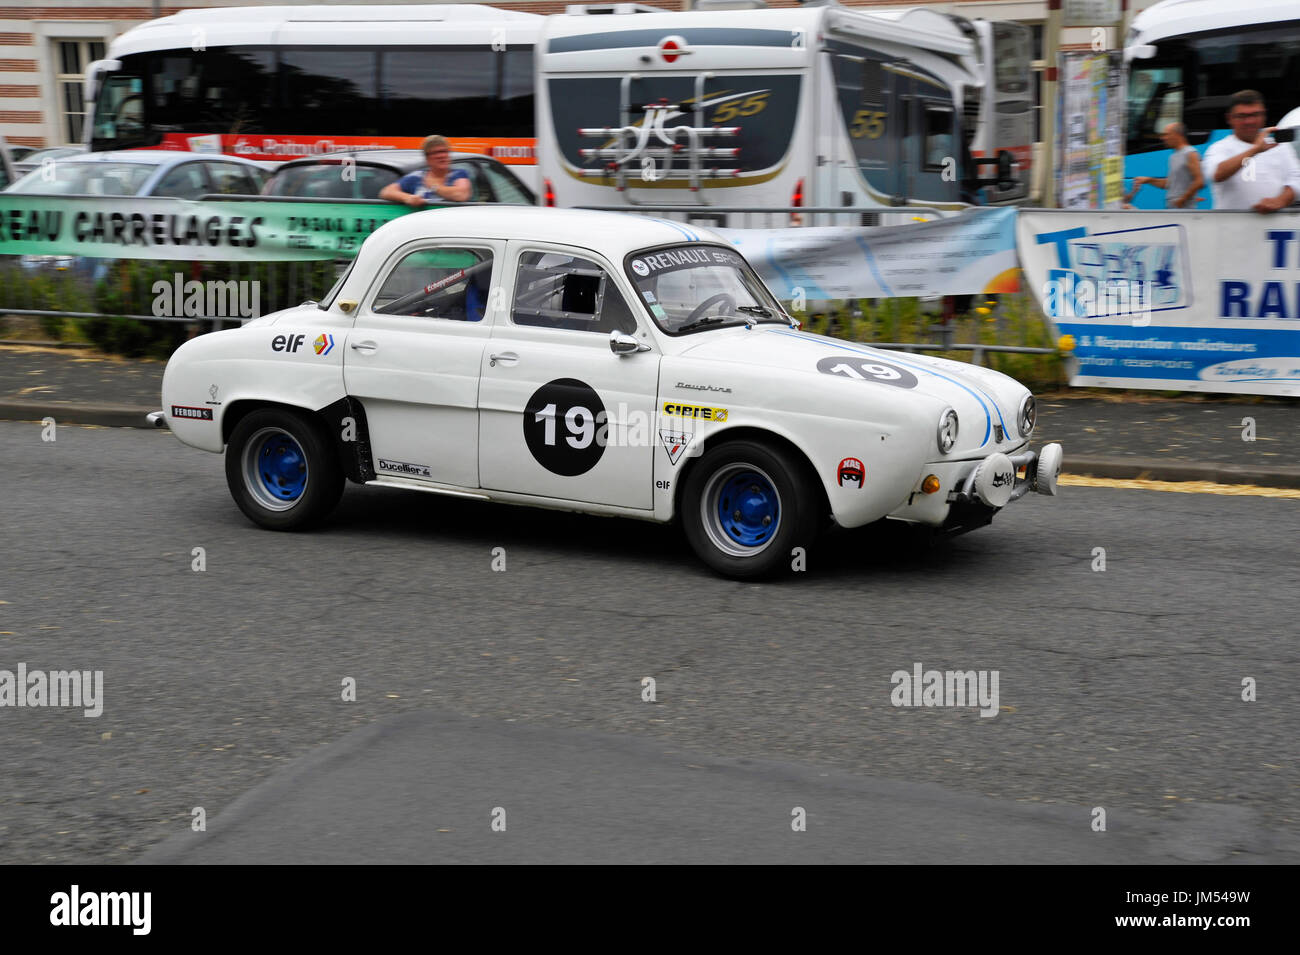 Racing Renault Dauphine at the historic grand prix Bressuire France Stock Photo